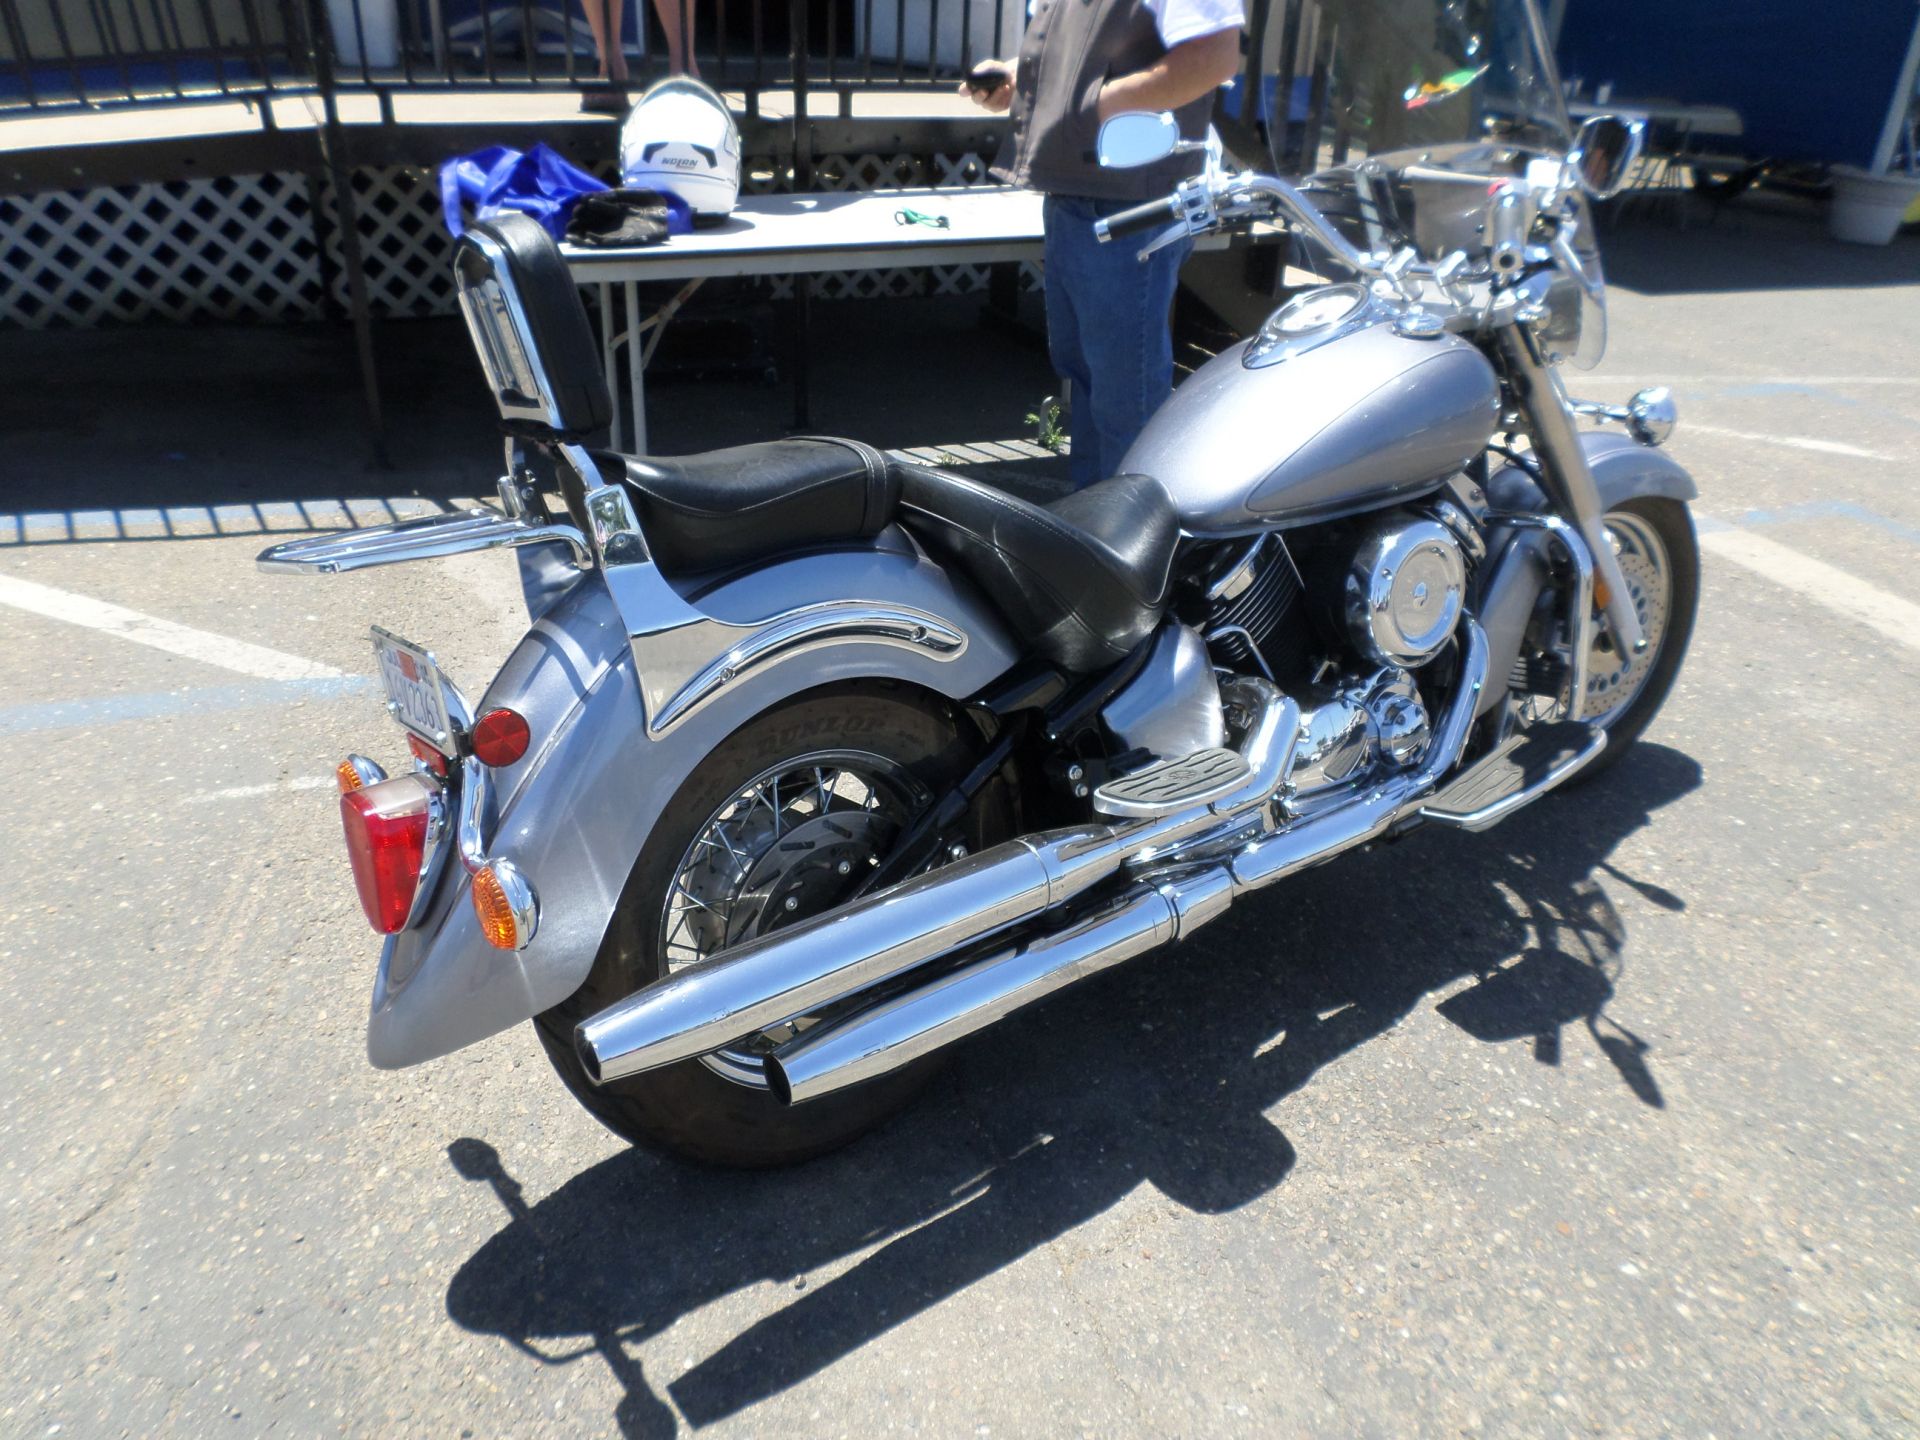 Motorcycle for sale: 2003 Yamaha XVS1100A Classic in Lodi Stockton CA